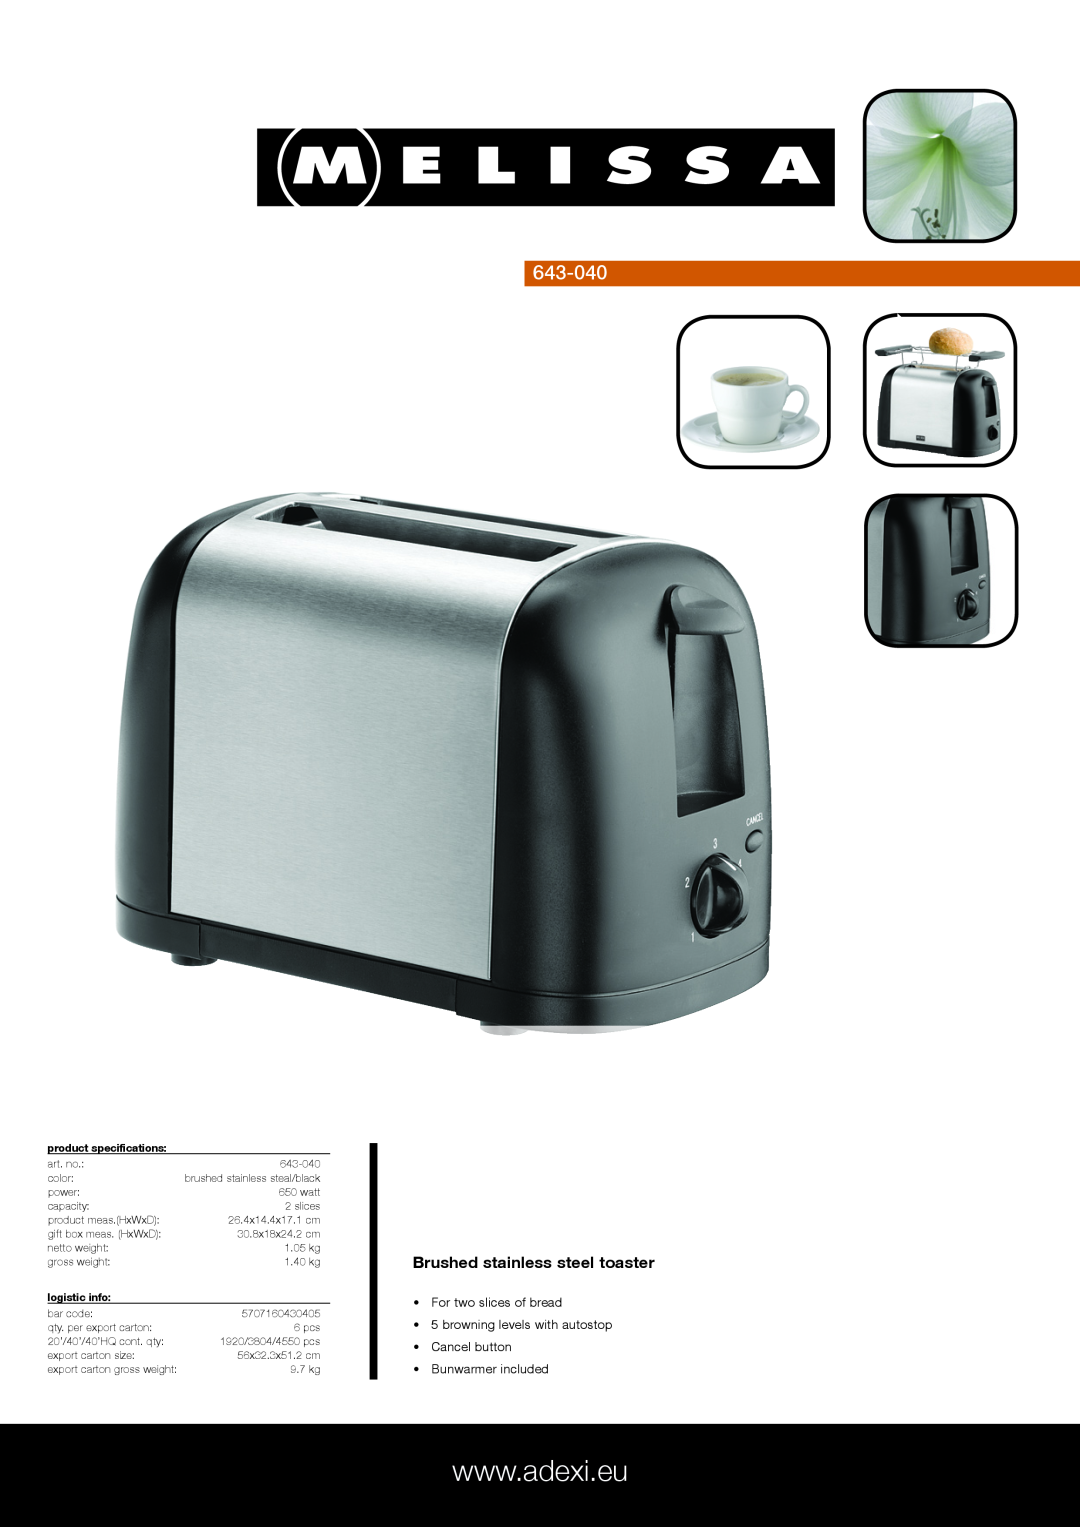 Melissa 643-040 specifications Brushed stainless steel toaster, For two slices of bread, Bunwarmer included, logistic info 